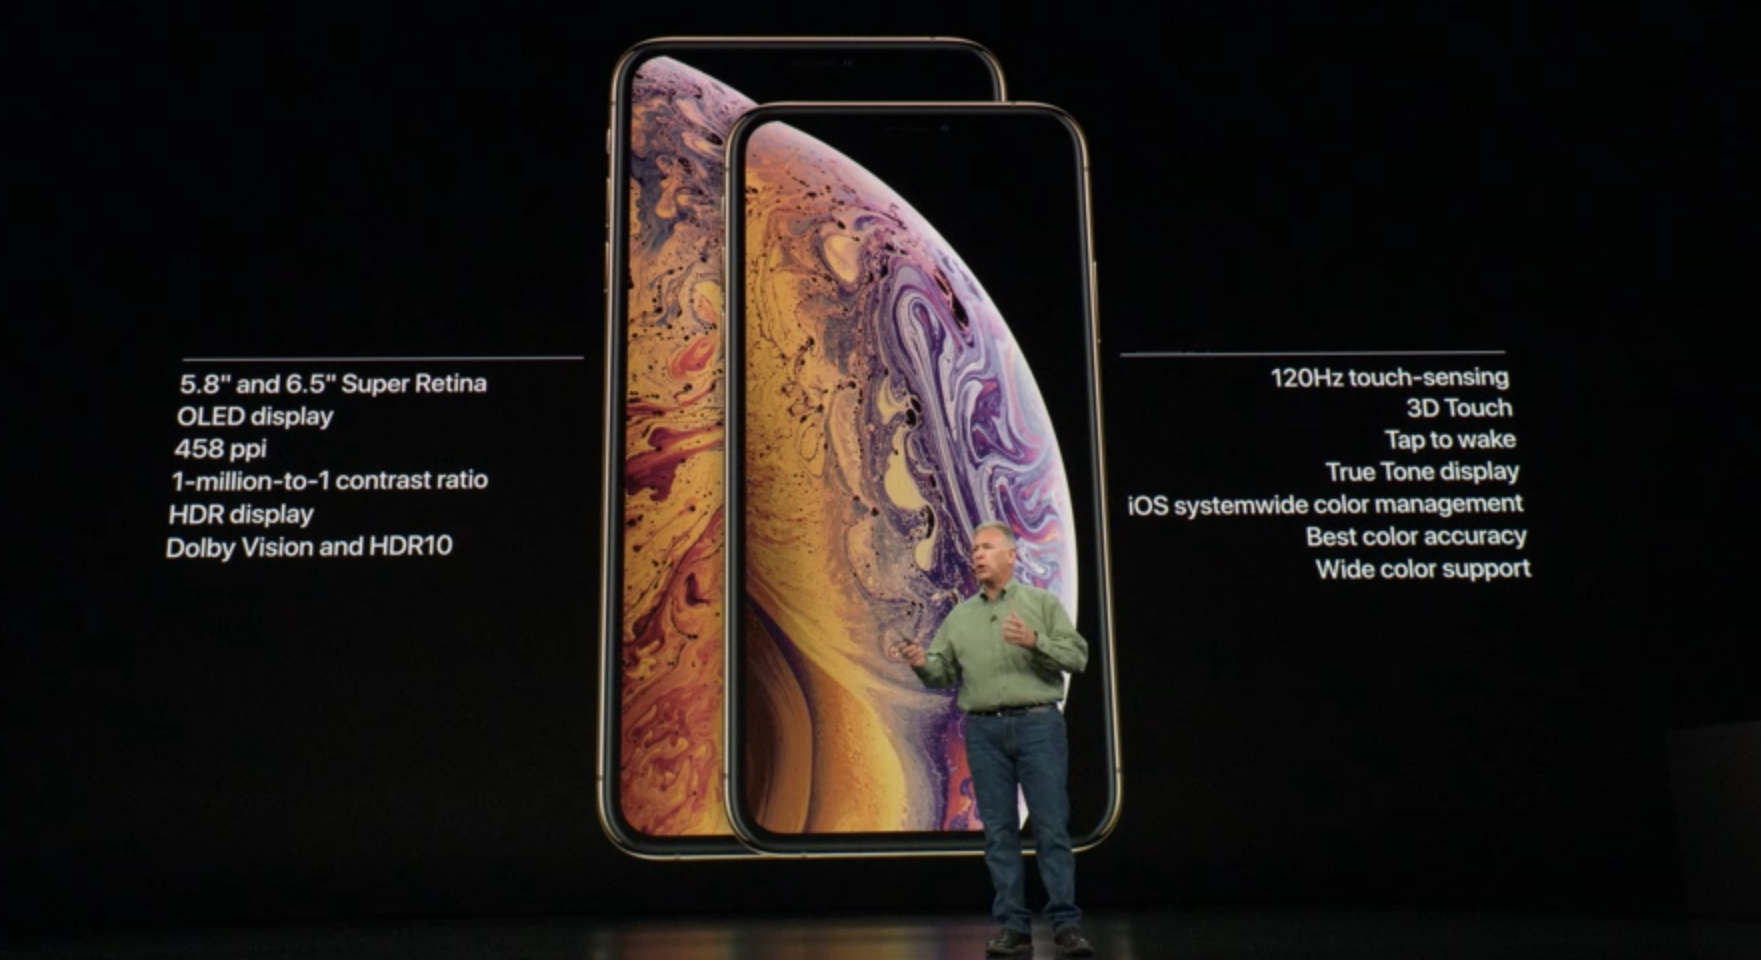 iPhone Xs and iPhone Xs Max